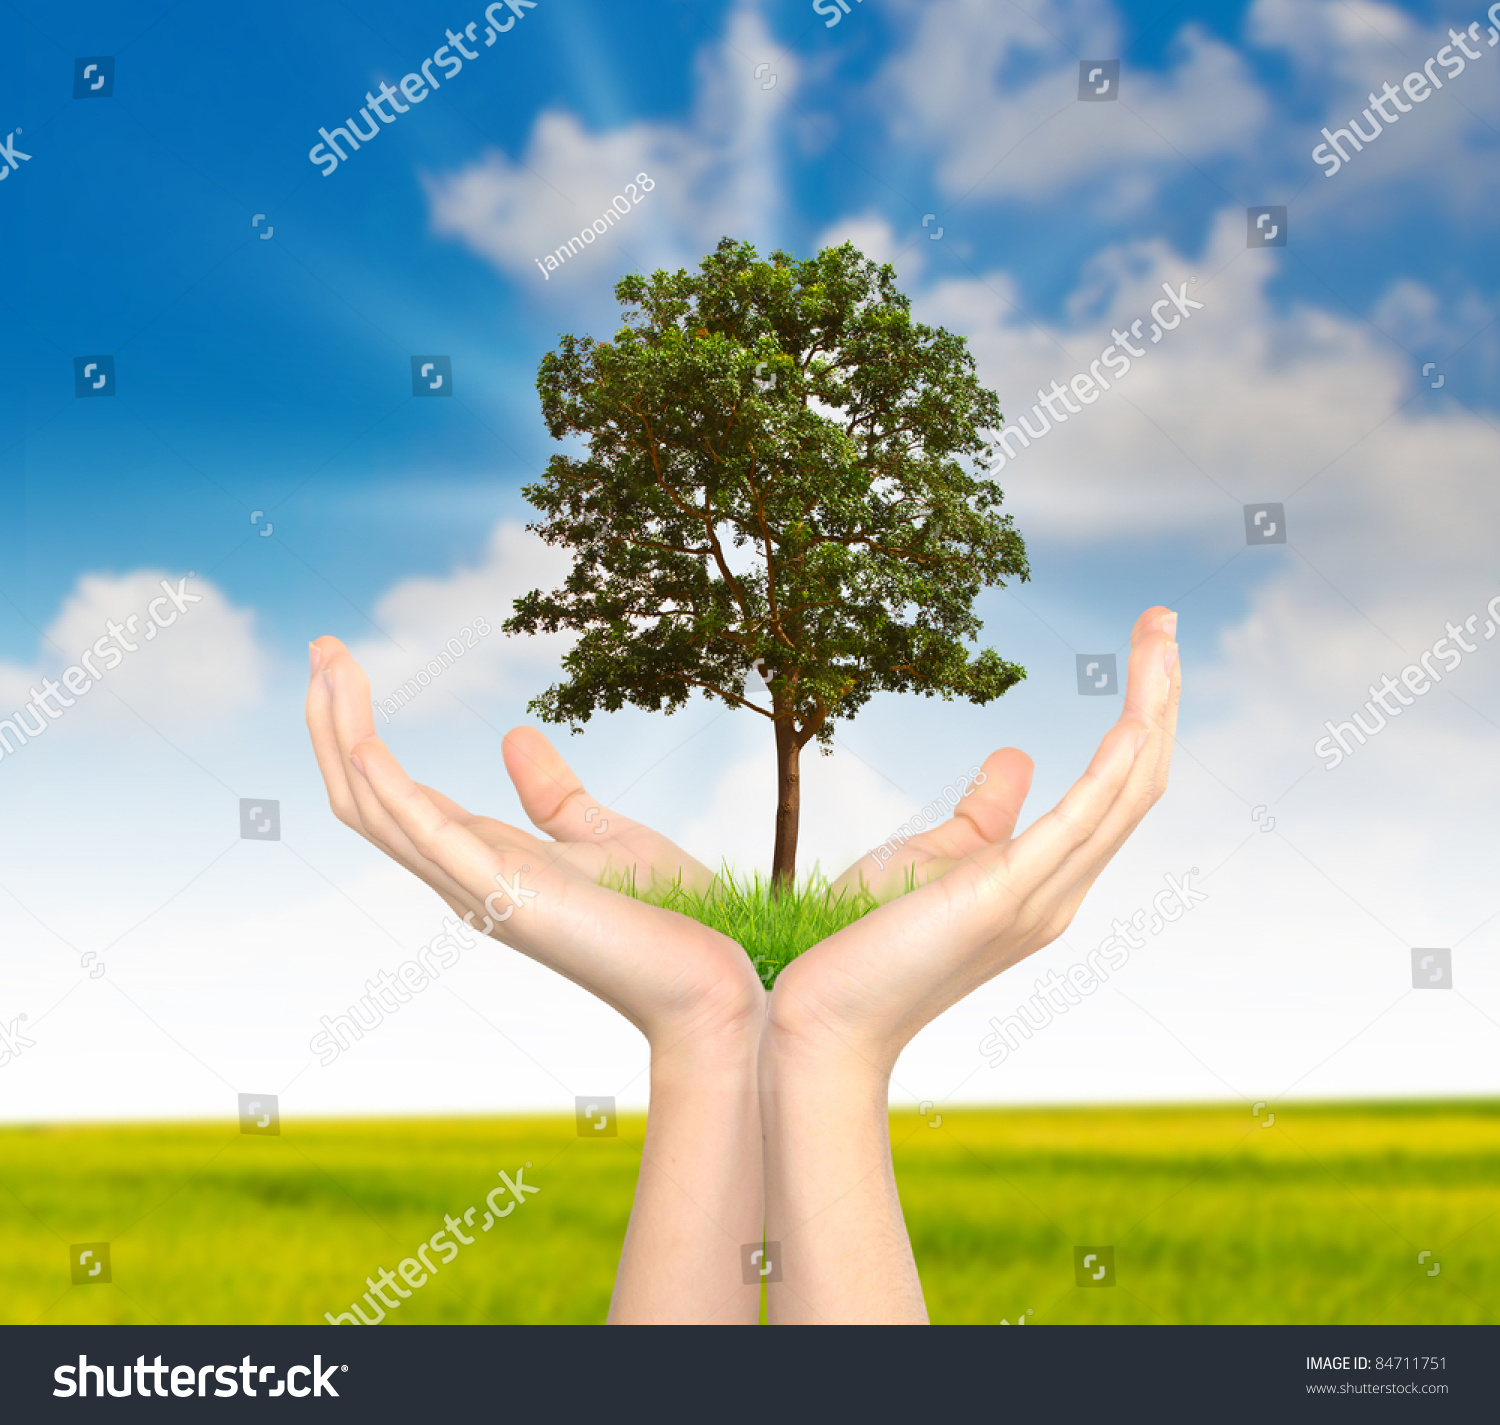 Hand Holding A Tree Stock Photo 84711751 : Shutterstock